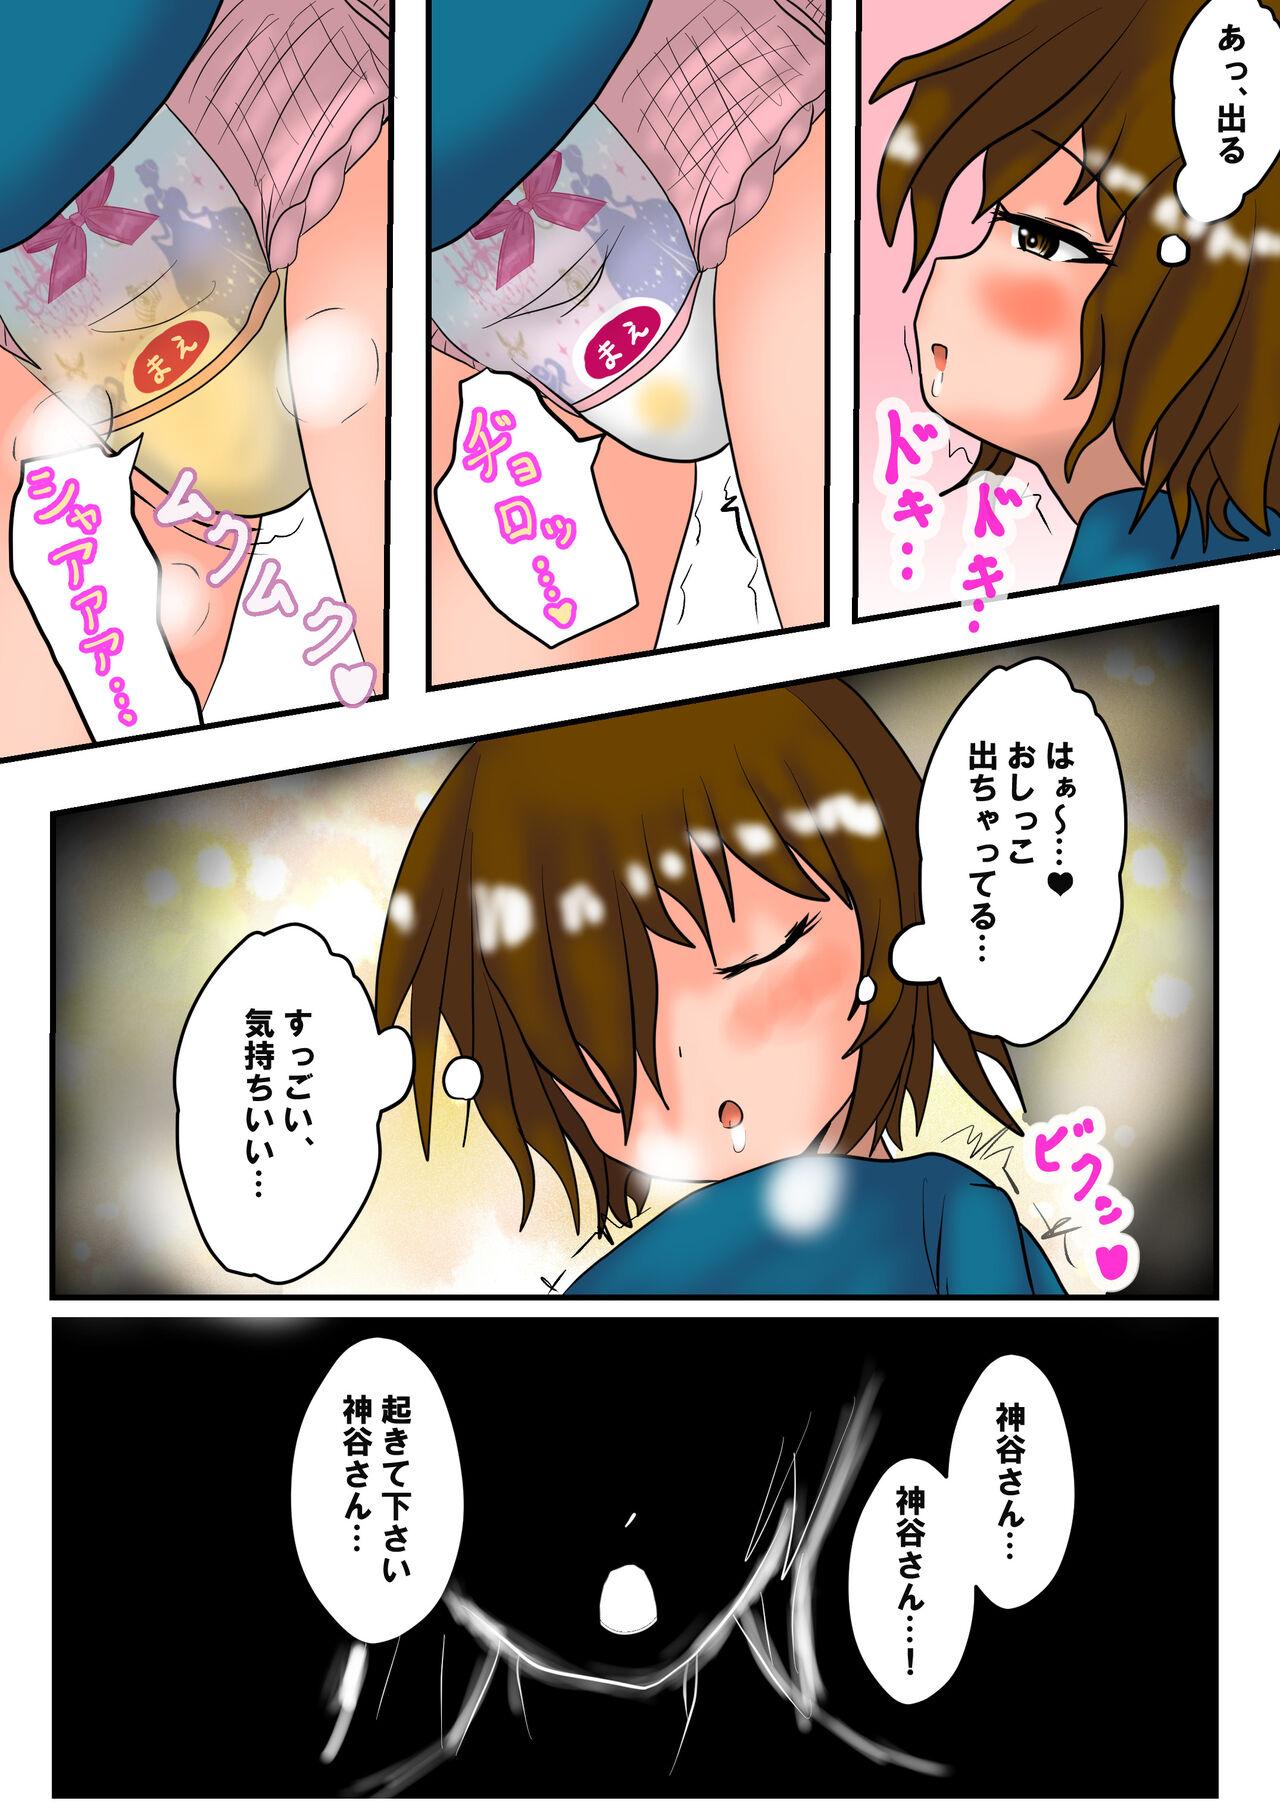 Ikillitts THE DIAPER GIRLS〈Ⅱ〉 - Original Foreskin - Page 3